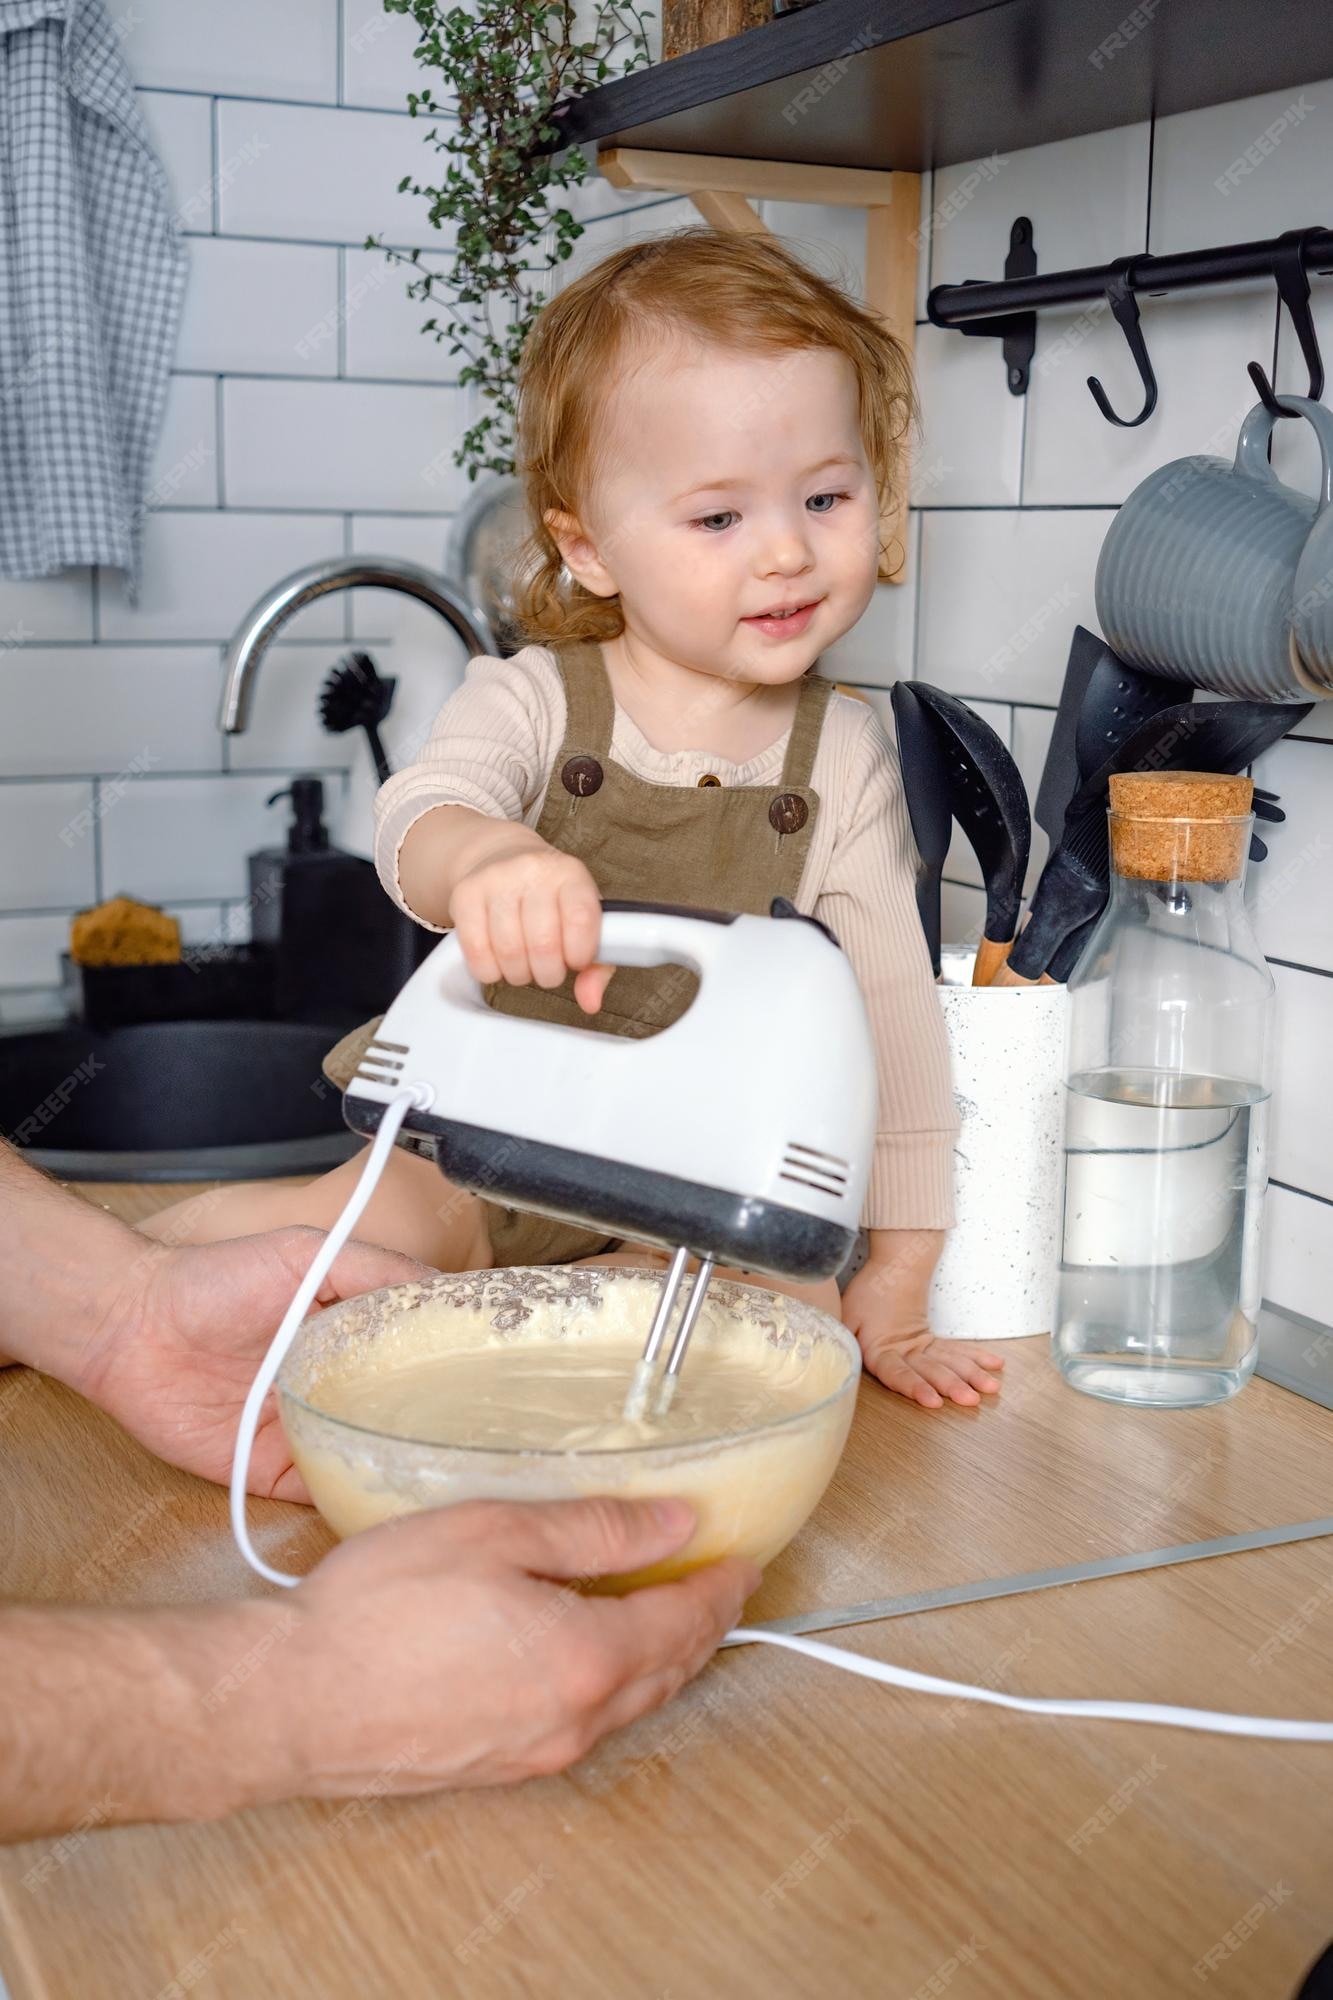 Premium Photo  A funny cute toddler mixing ingredients using blender  helping father a kid learning to cook